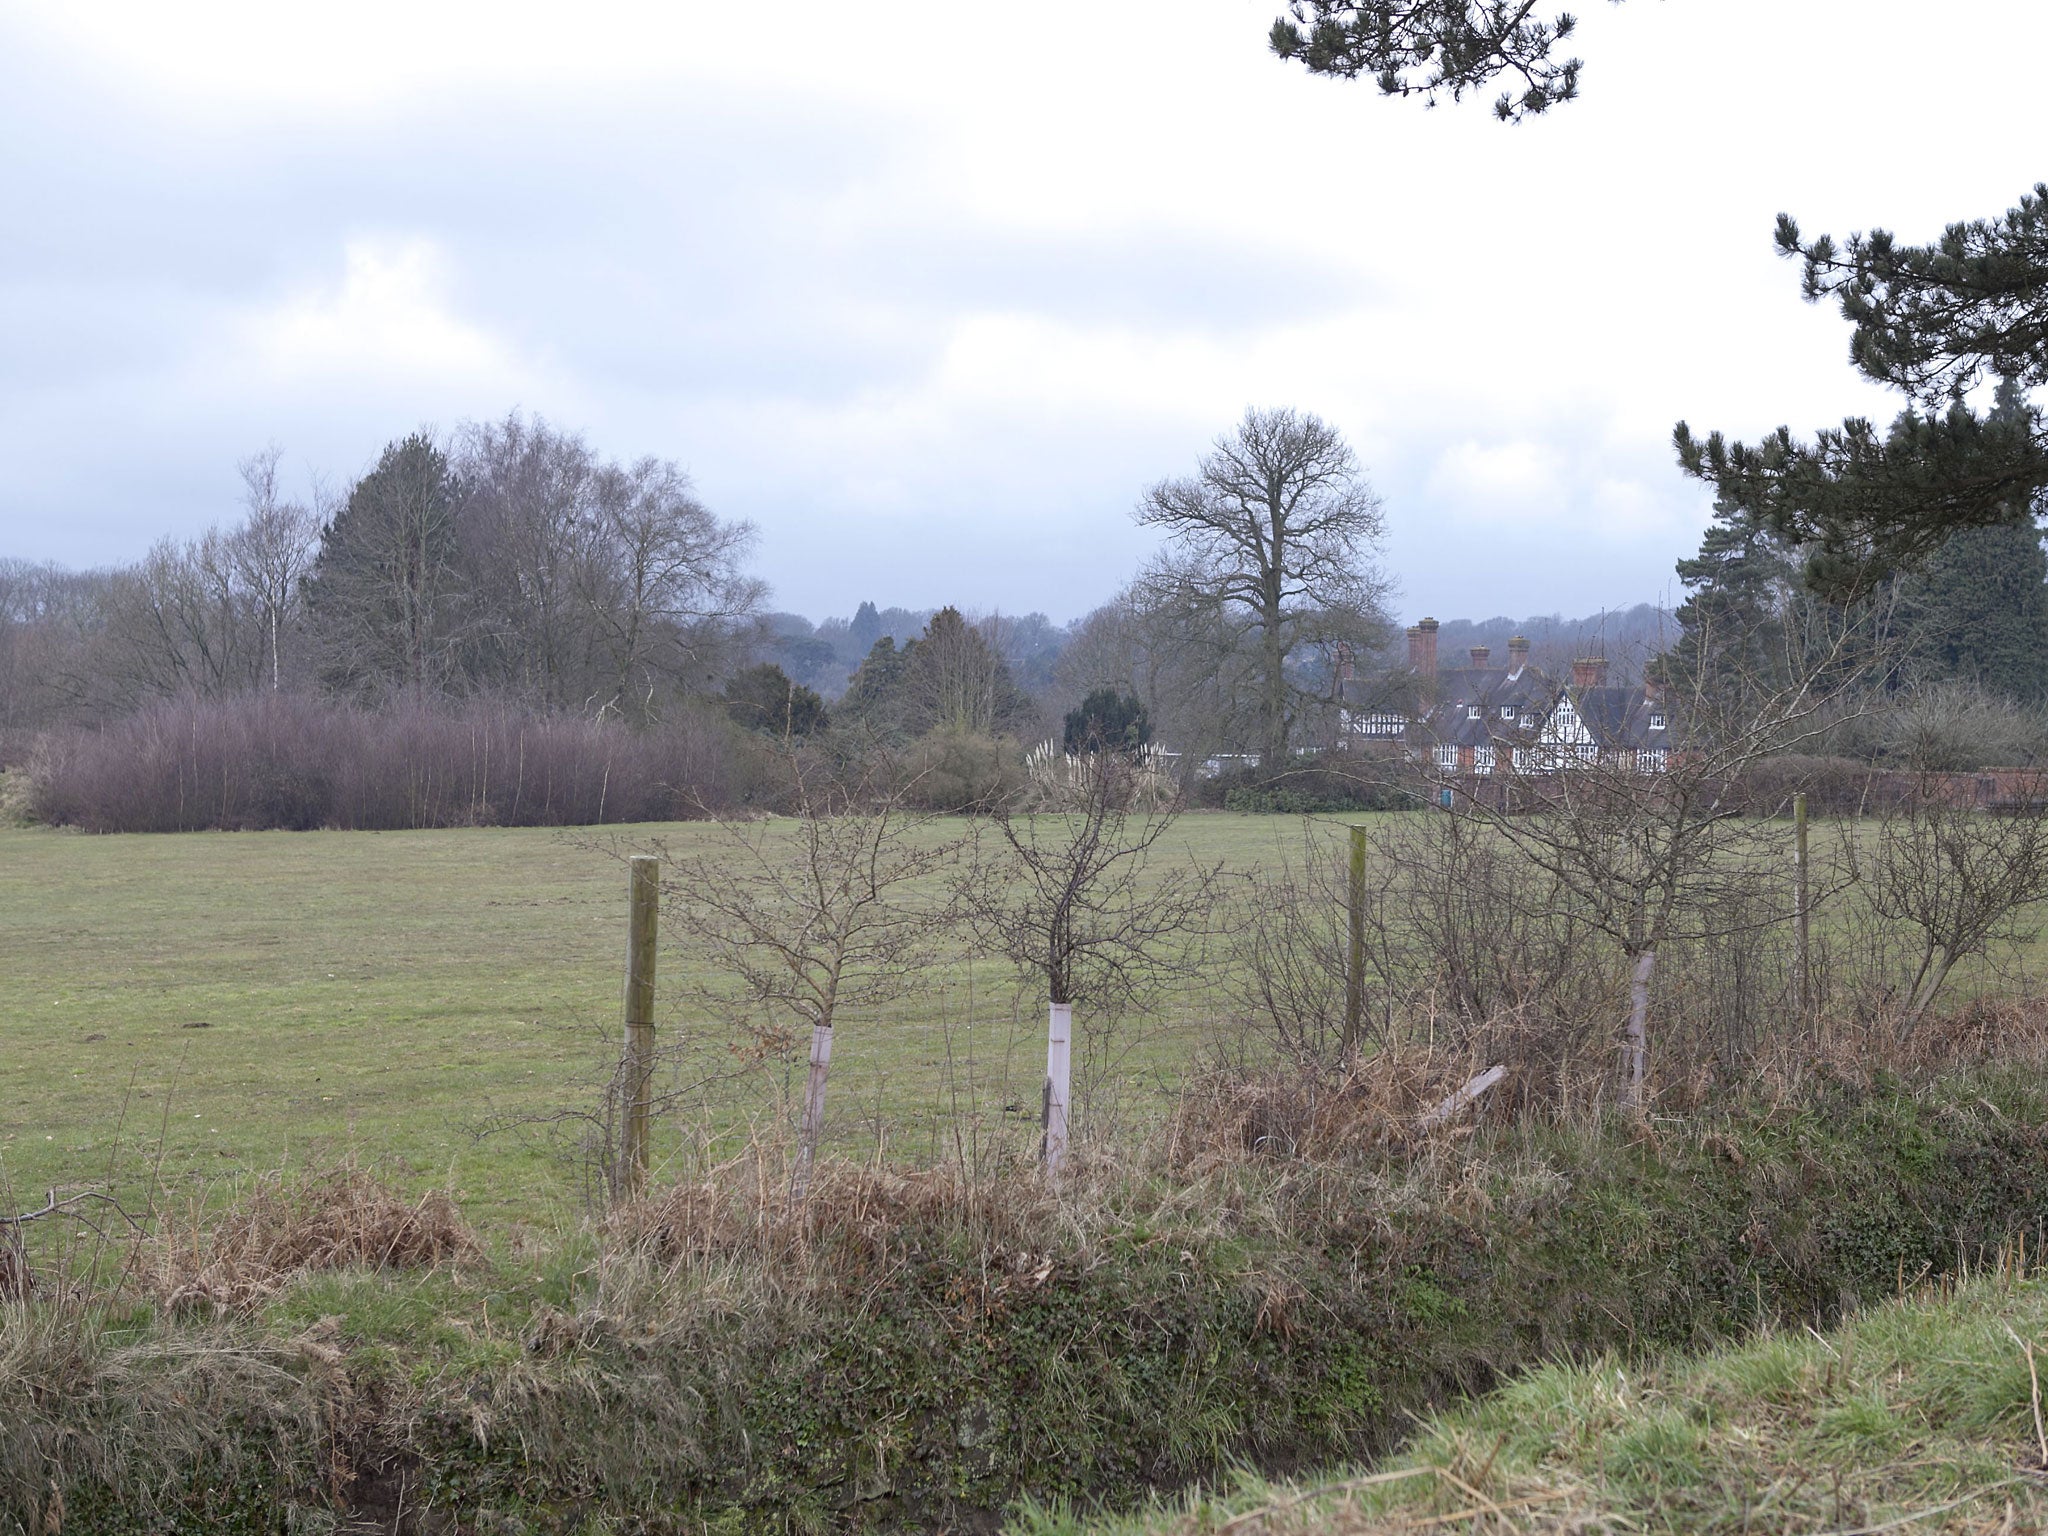 Overview of site of planned Durand Academy on former St Cuthmans School site near Midhurst, West Sussex